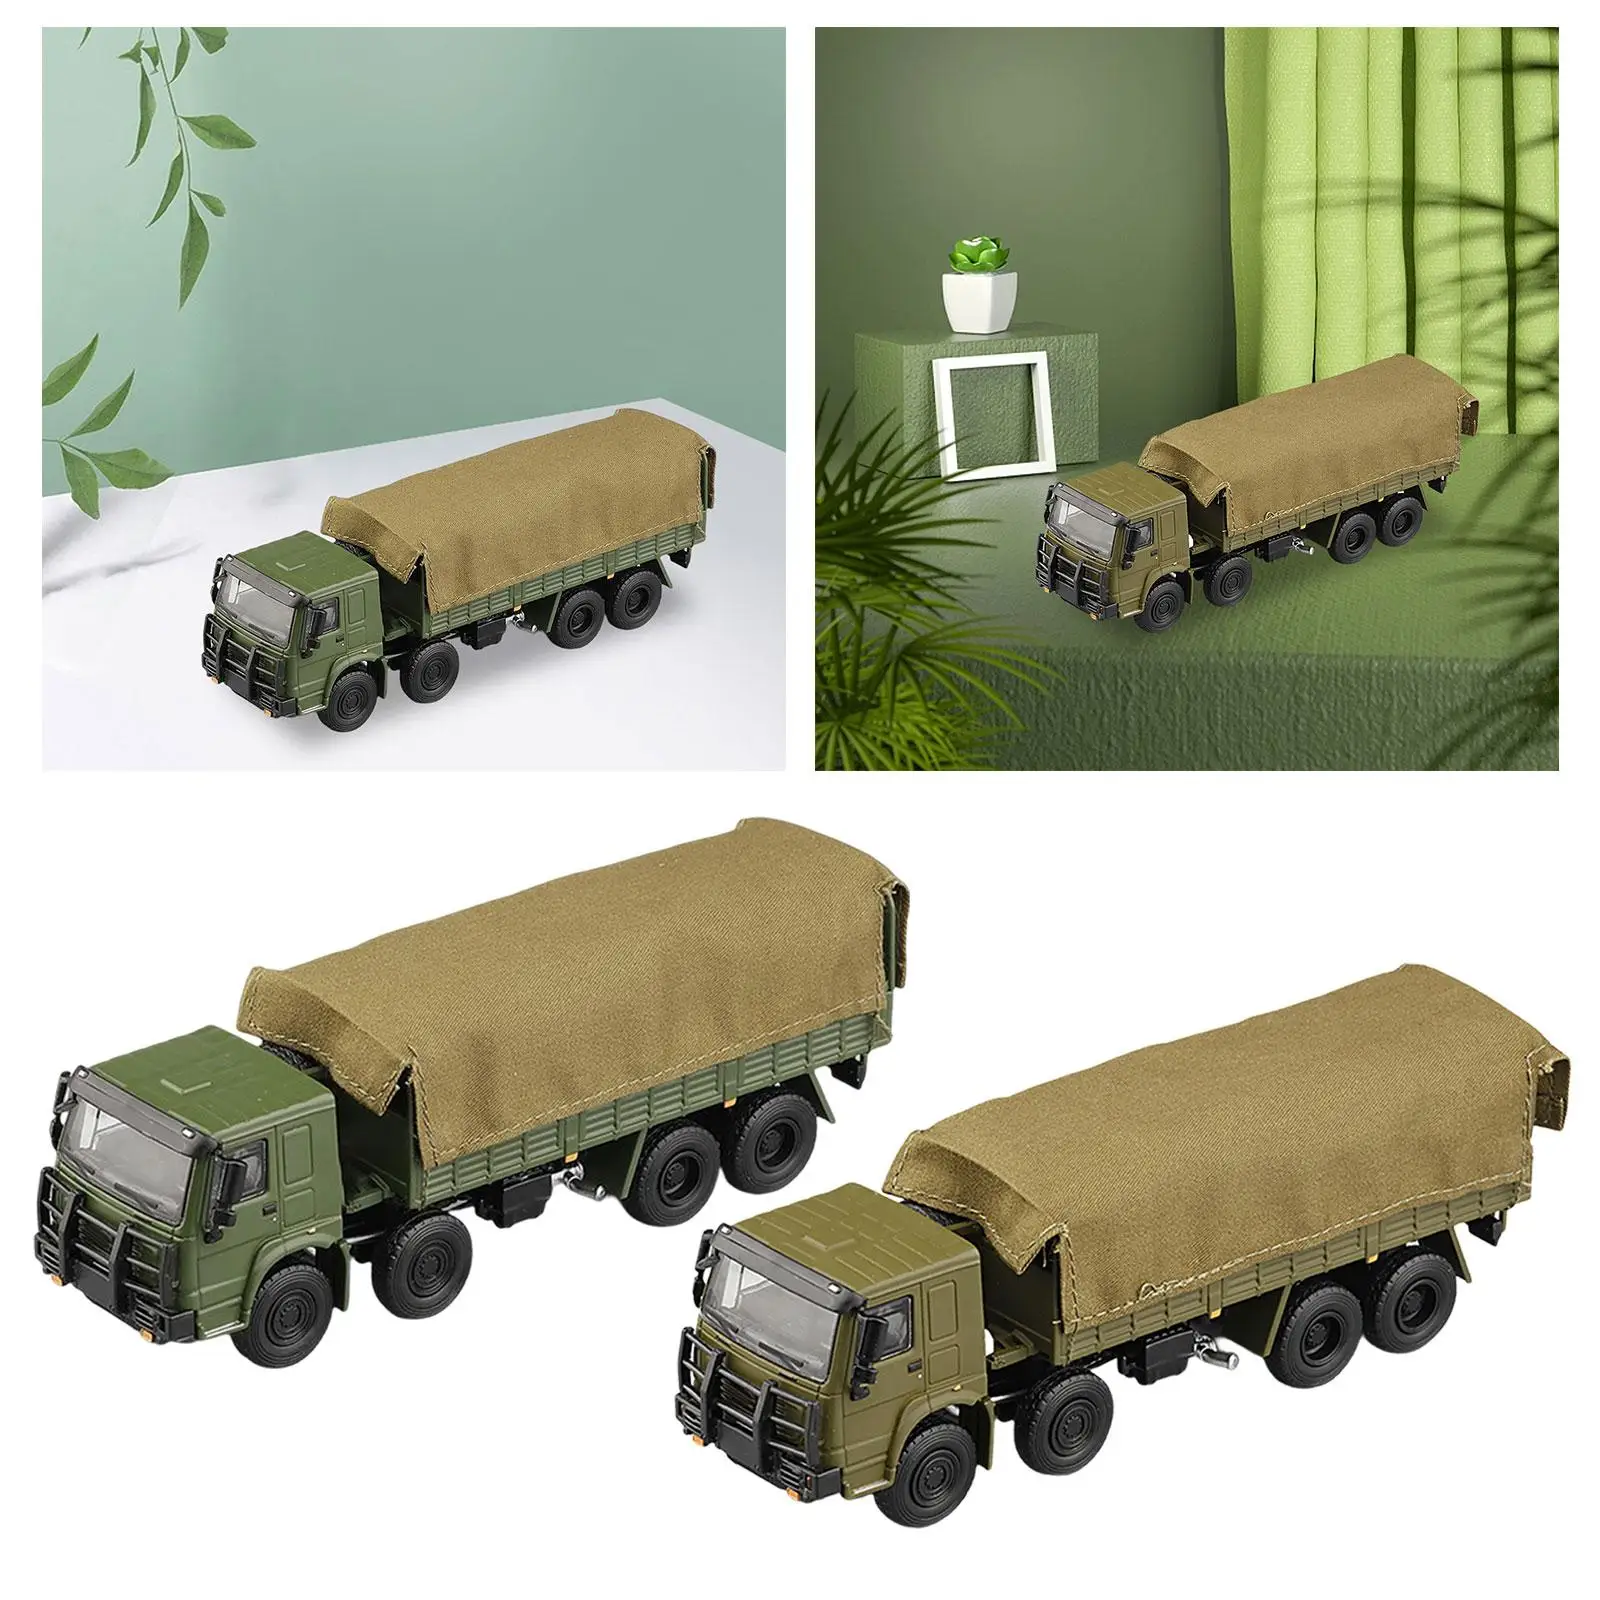 1:64 Diorama Street Car Model Sand Table Ornament Alloy Classic Car Model Collection for DIY Scene Photography Props Accessories